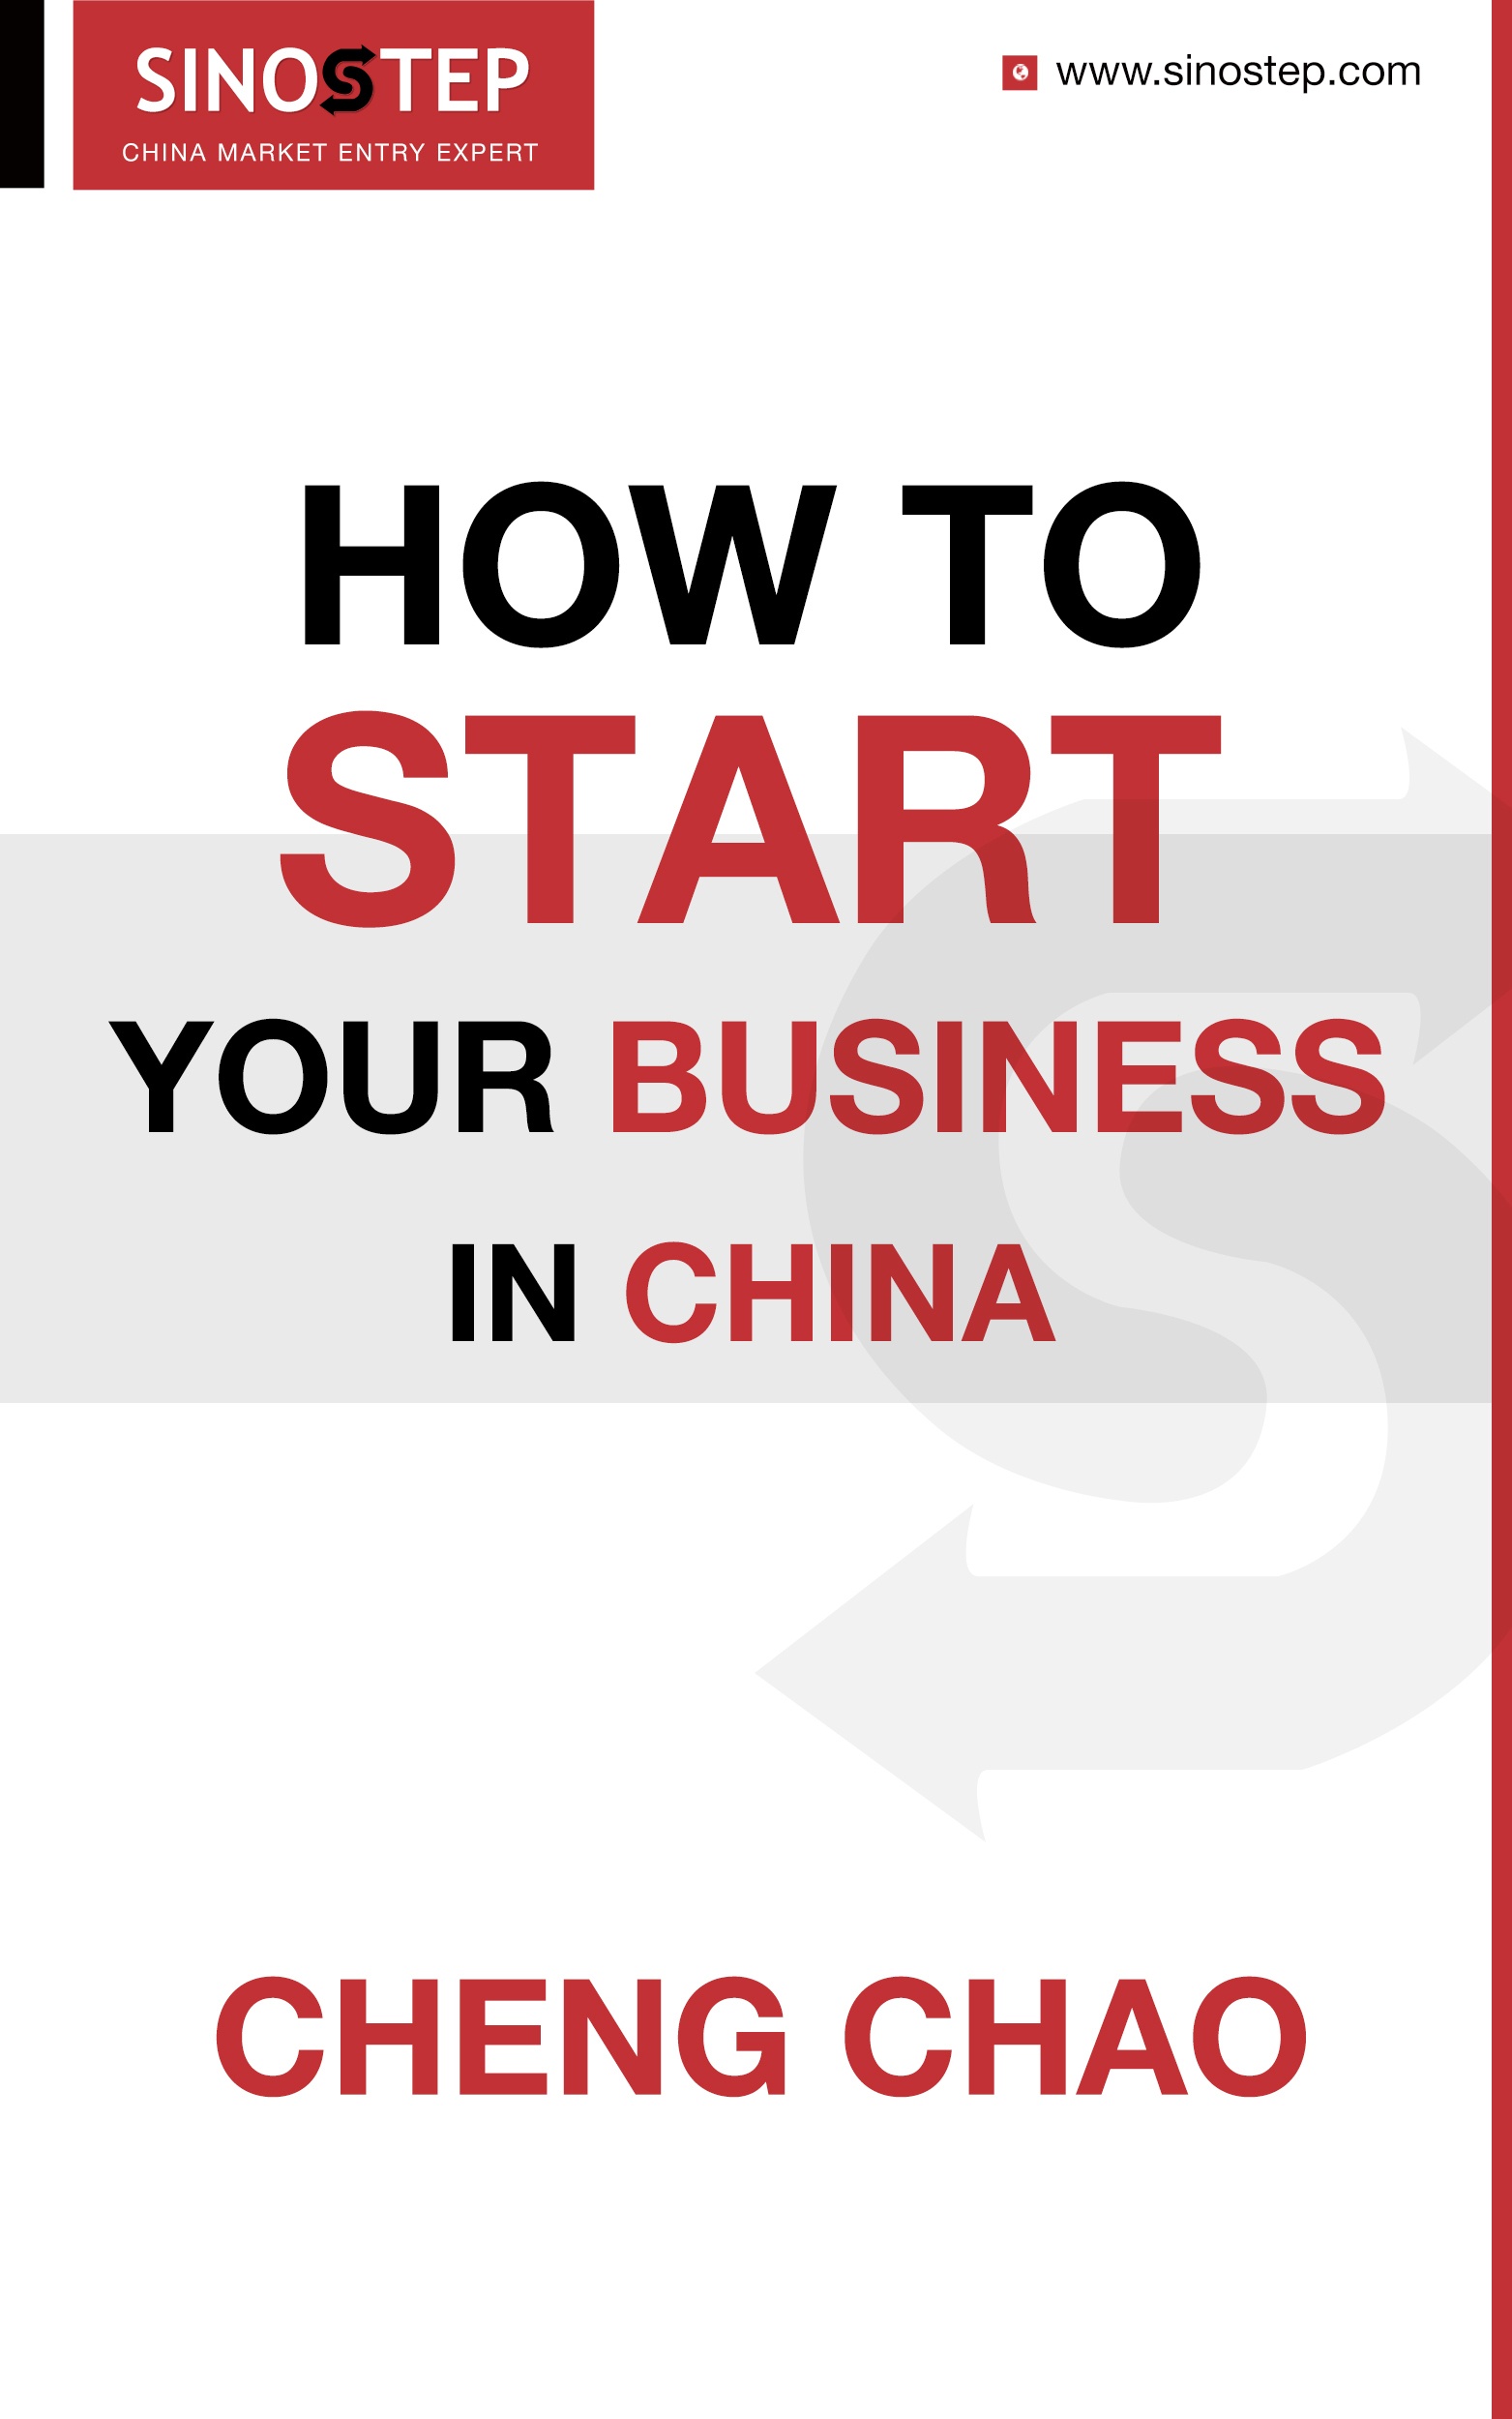 How to Start Your Business in China